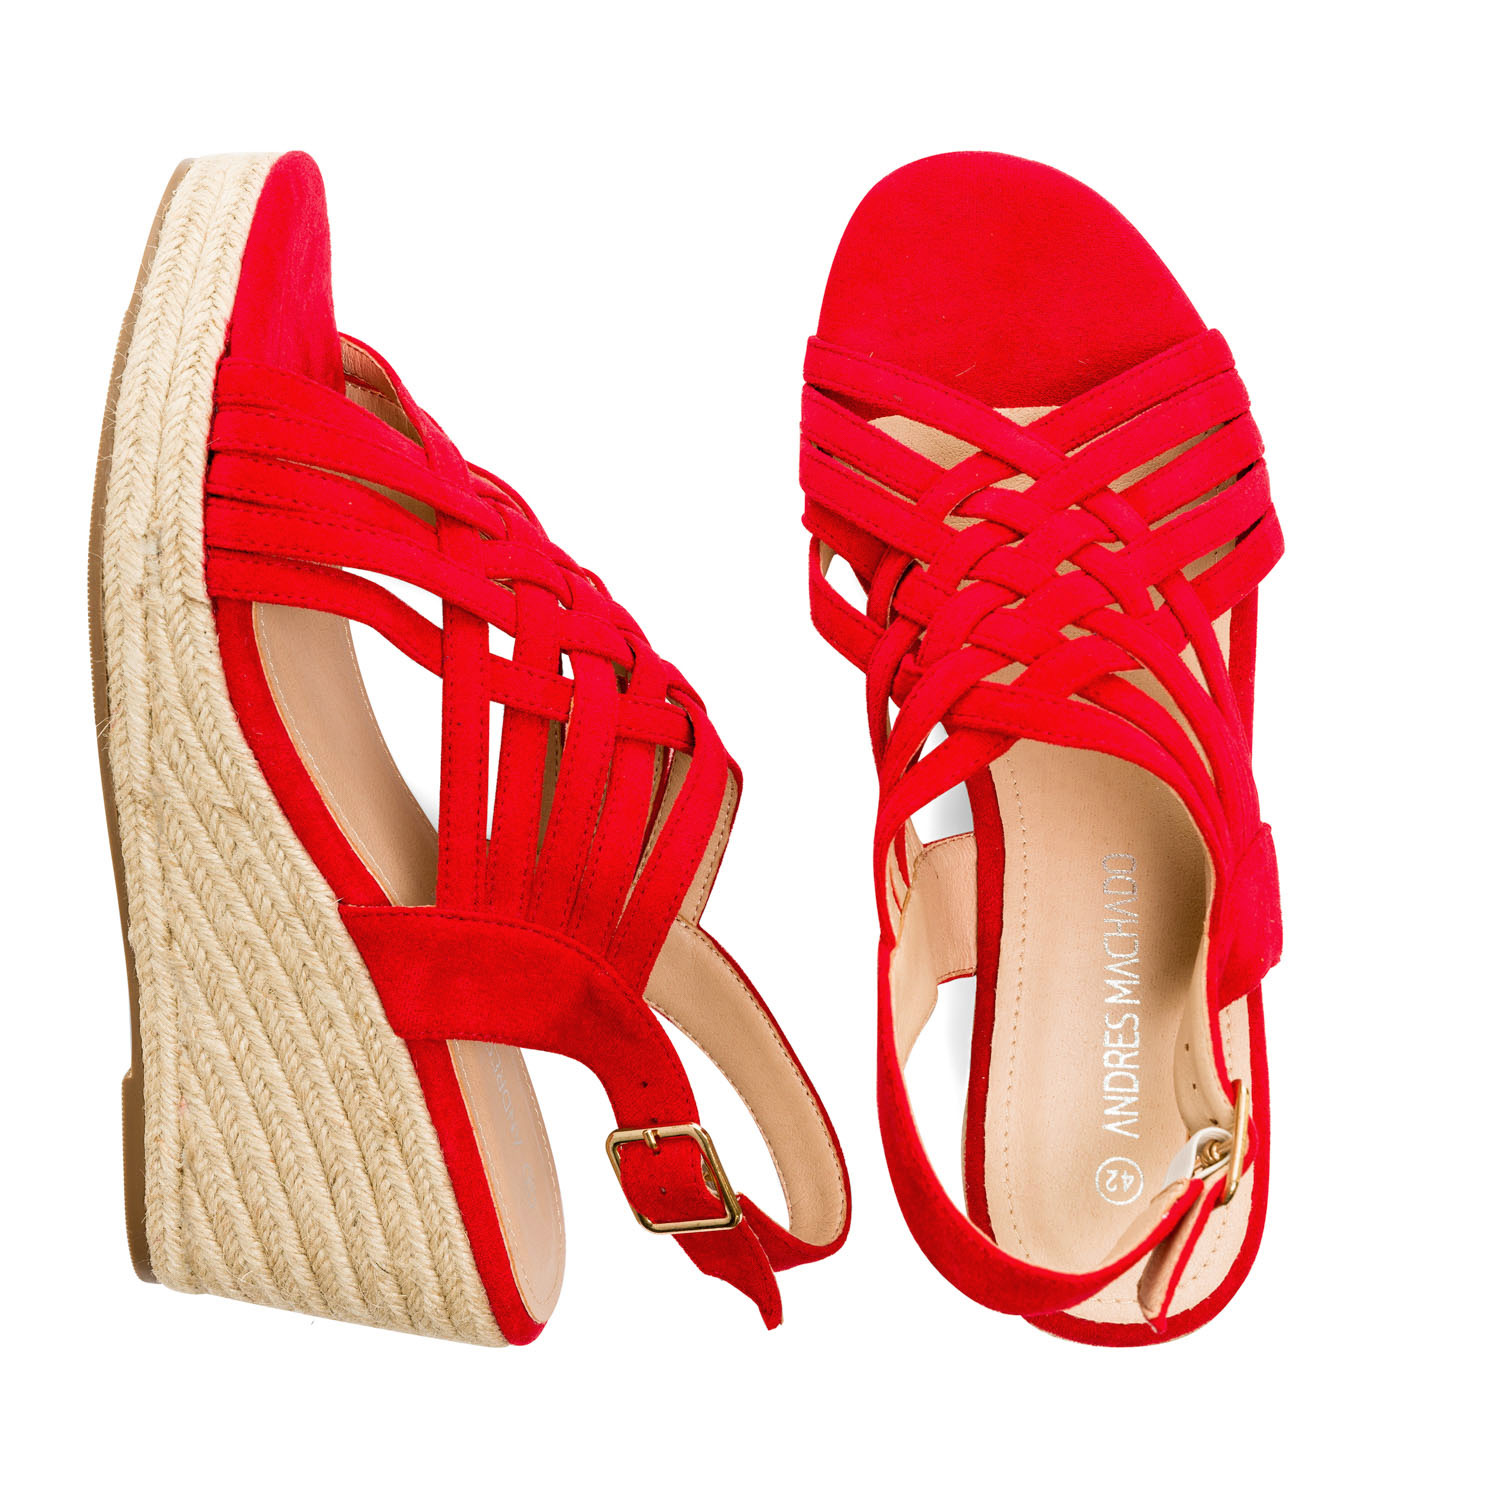 Red faux suede espadrilles with jute wedge 